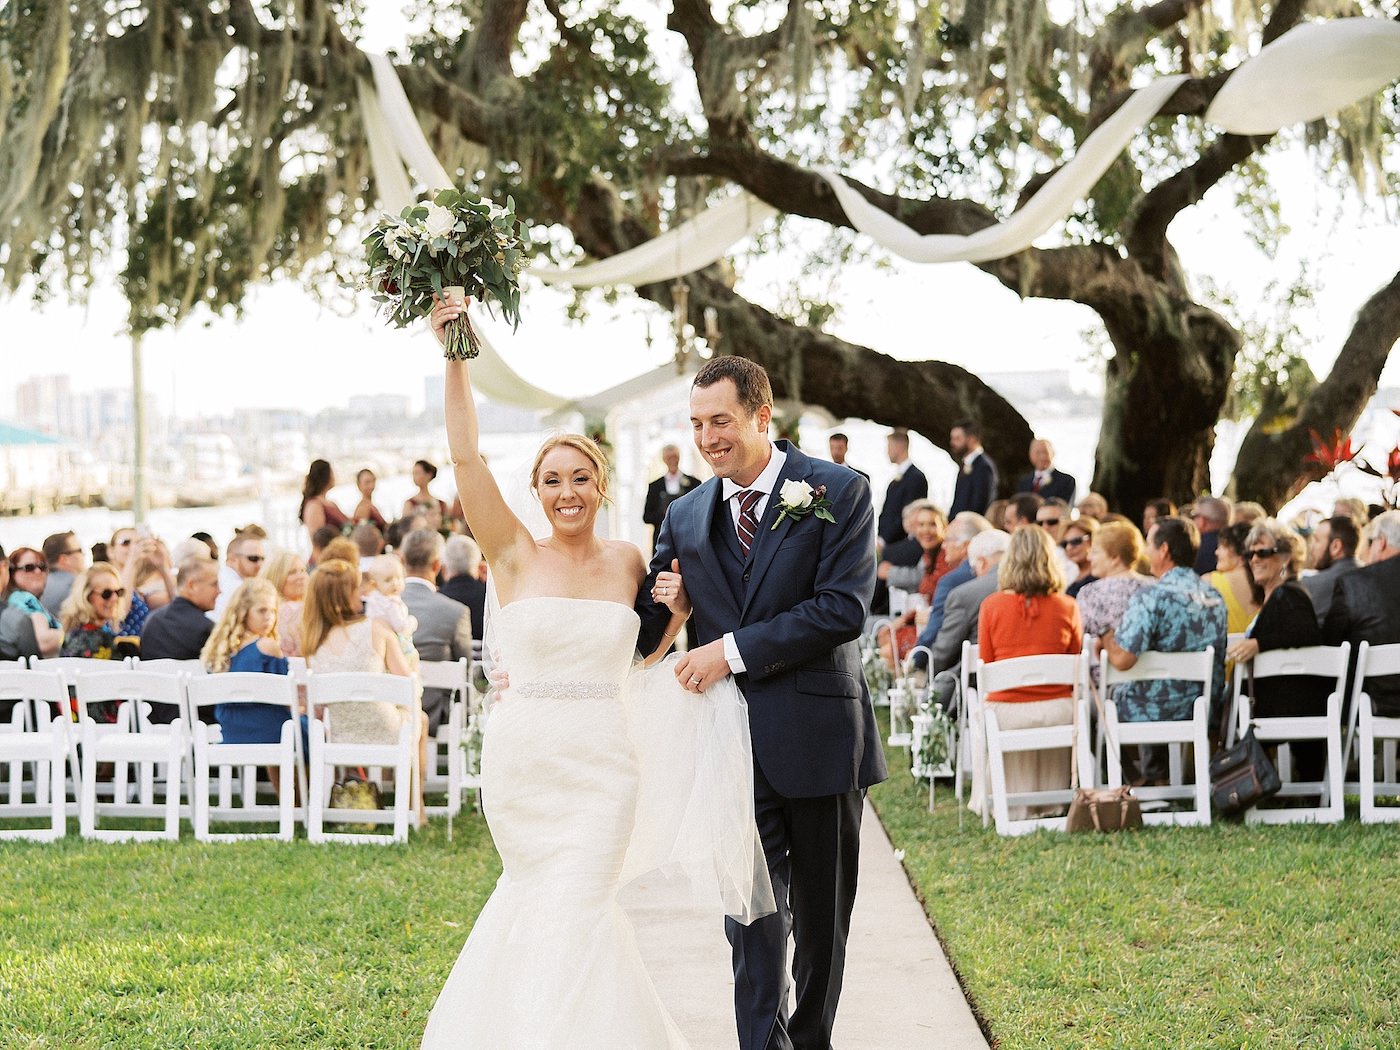 Bride and Groom Walking Down the Aisle | Florida Fall Autumn Outdoor Waterfront Wedding Ceremony | Strapless Ivory Tulle Rouched Mermaid Vera Wang Bridal Gown with Rhinestone Beaded Sash Waistband | Groom in Classic Navy Blue Suit